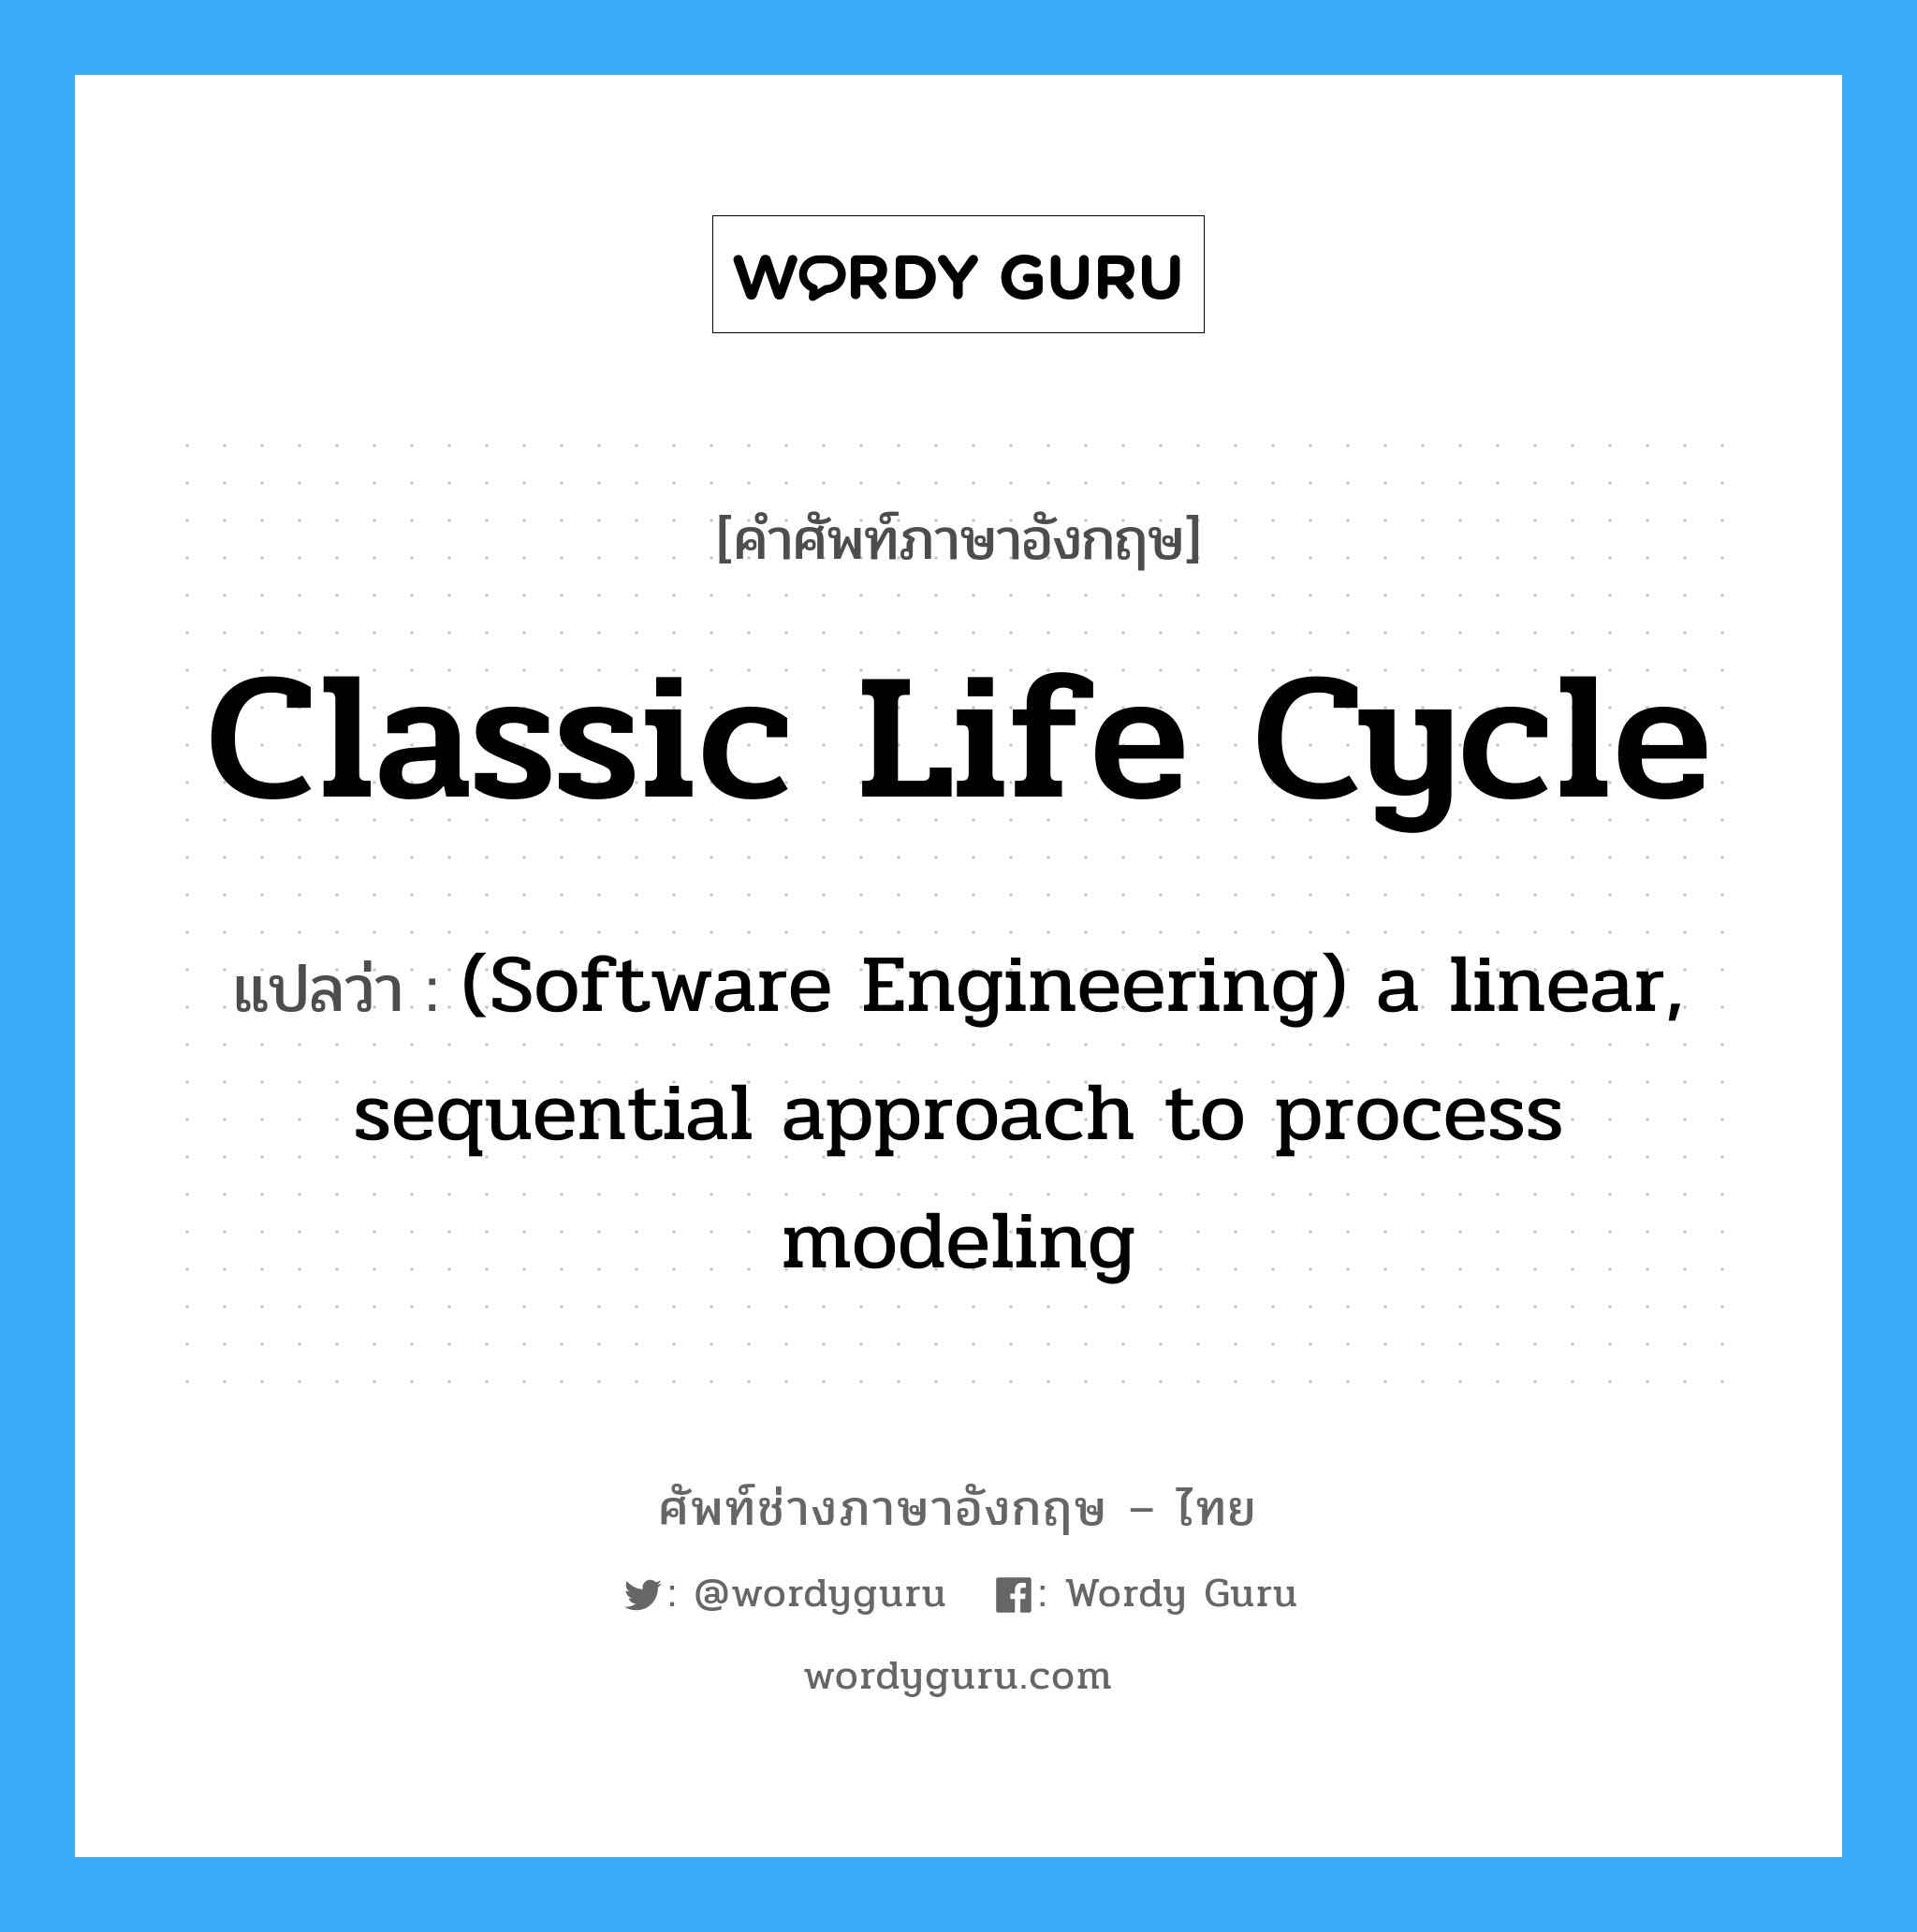 Classic life cycle แปลว่า?, คำศัพท์ช่างภาษาอังกฤษ - ไทย Classic life cycle คำศัพท์ภาษาอังกฤษ Classic life cycle แปลว่า (Software Engineering) a linear, sequential approach to process modeling